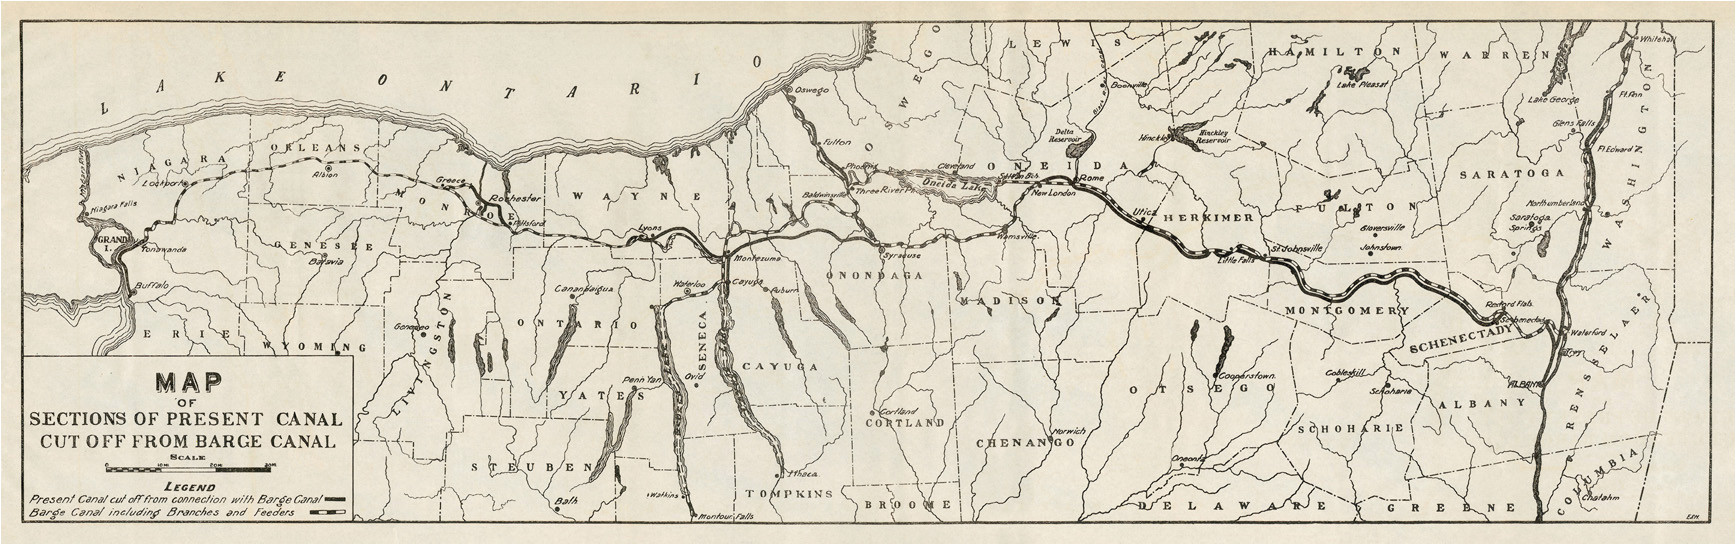 erie canal maps